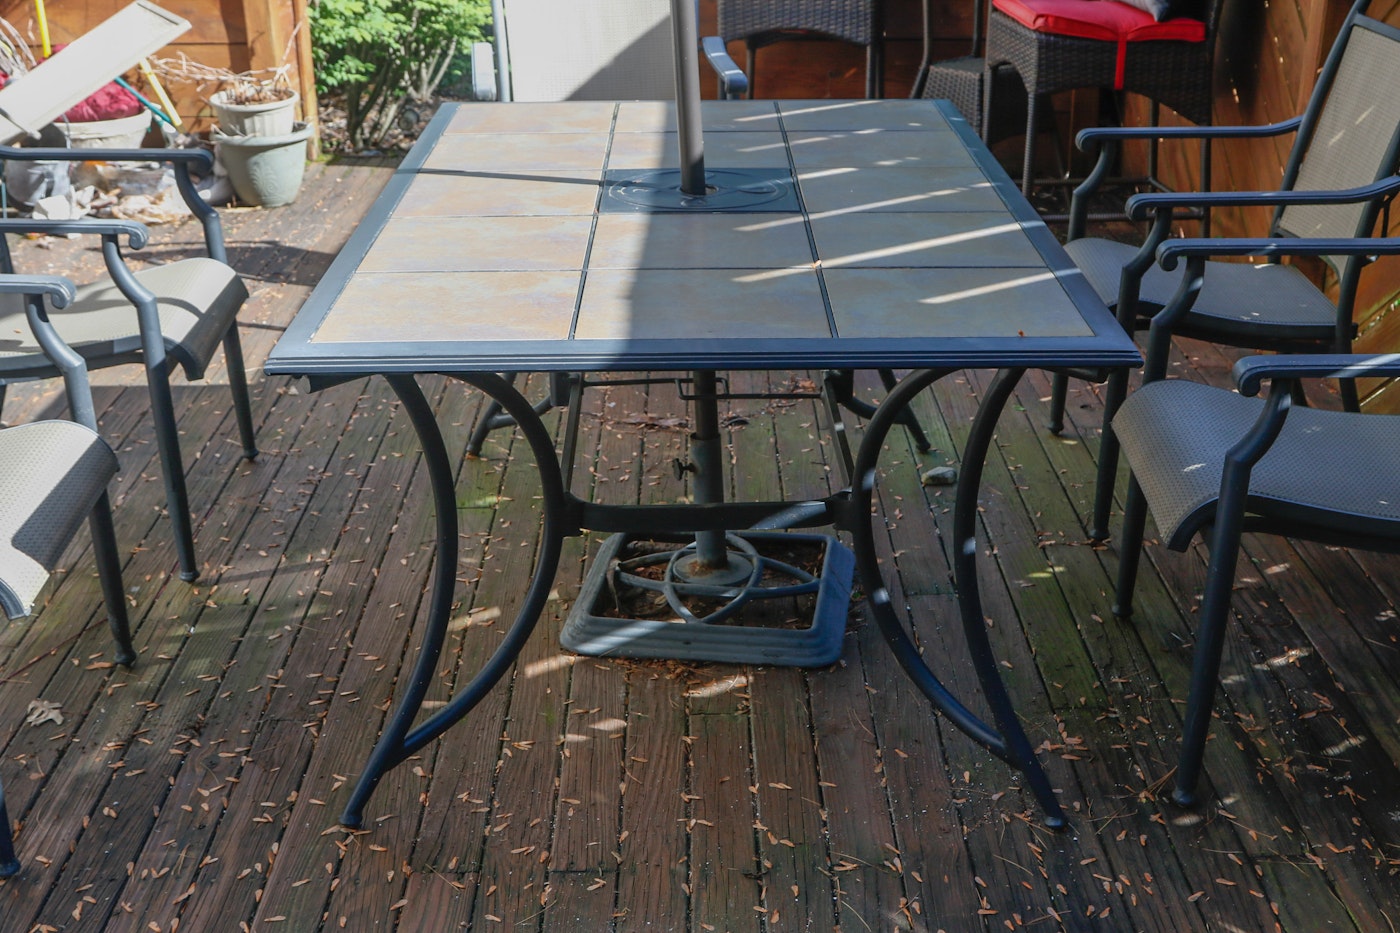 Ceramic Tile Top Patio Dining Table and Chairs with Umbrella | EBTH